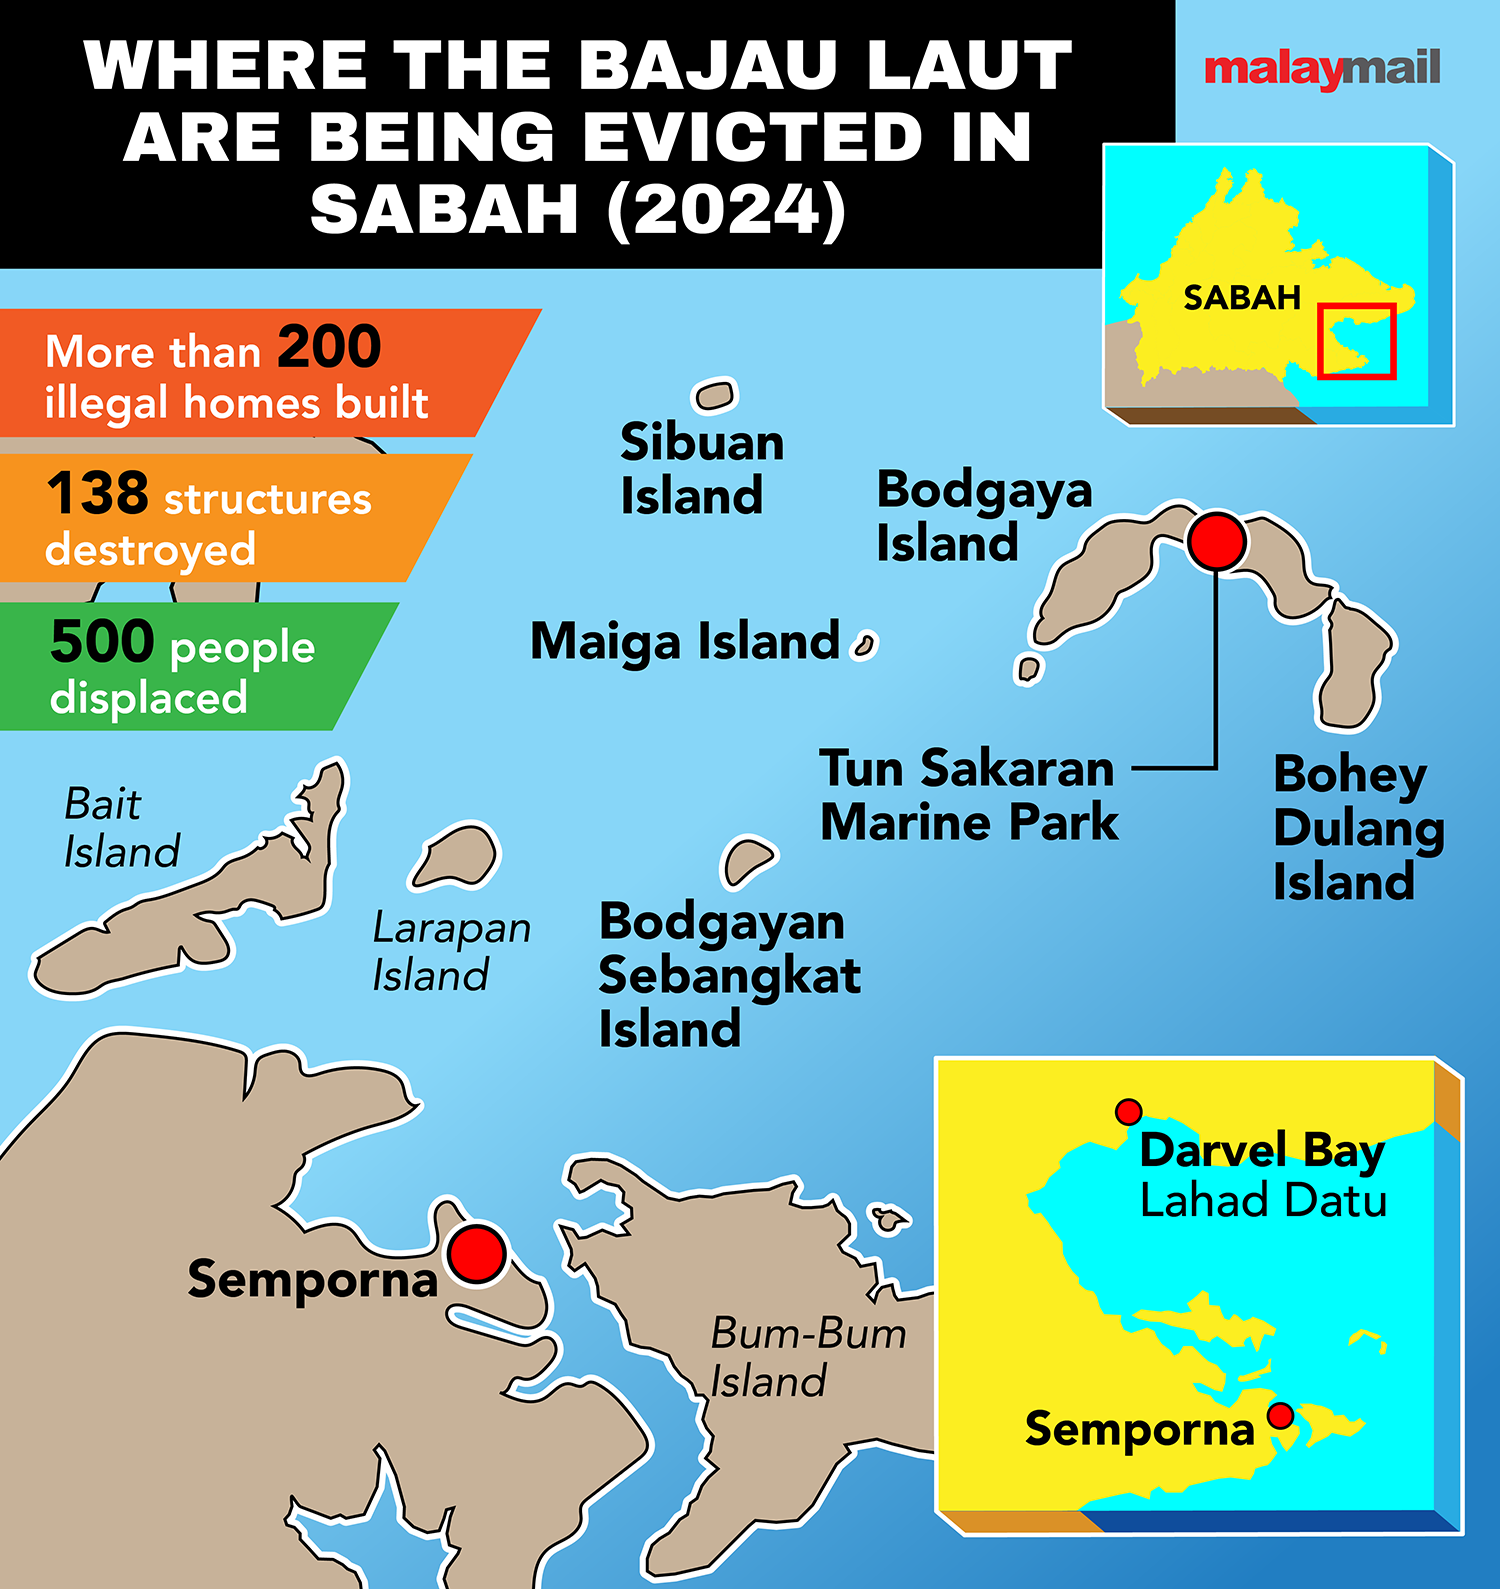 Sabah’s tough stance on Bajau Laut tribe raises questions about how the state should treat the stateless, with the world watching – eNews Malaysia